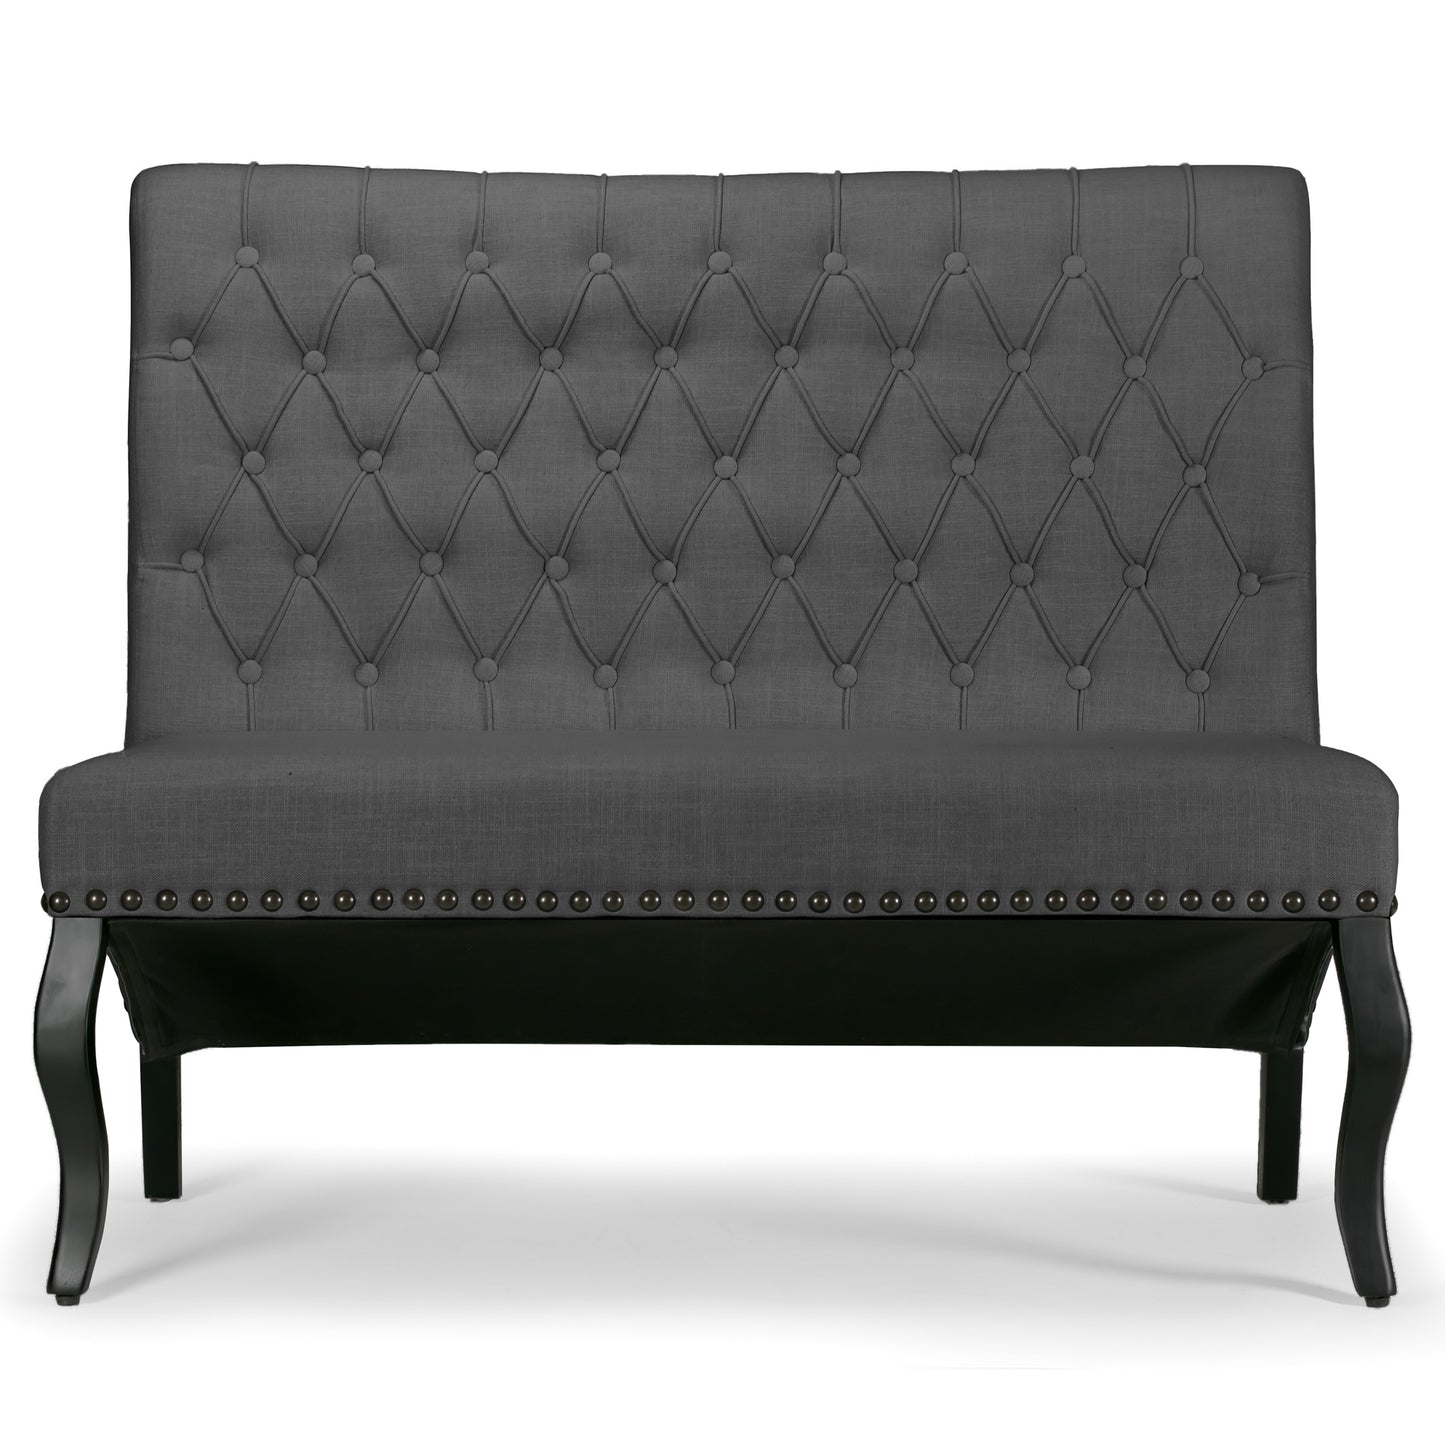 Alisa Grey Upholstered Settee Banquette Bench Loveseat with Button Tufting